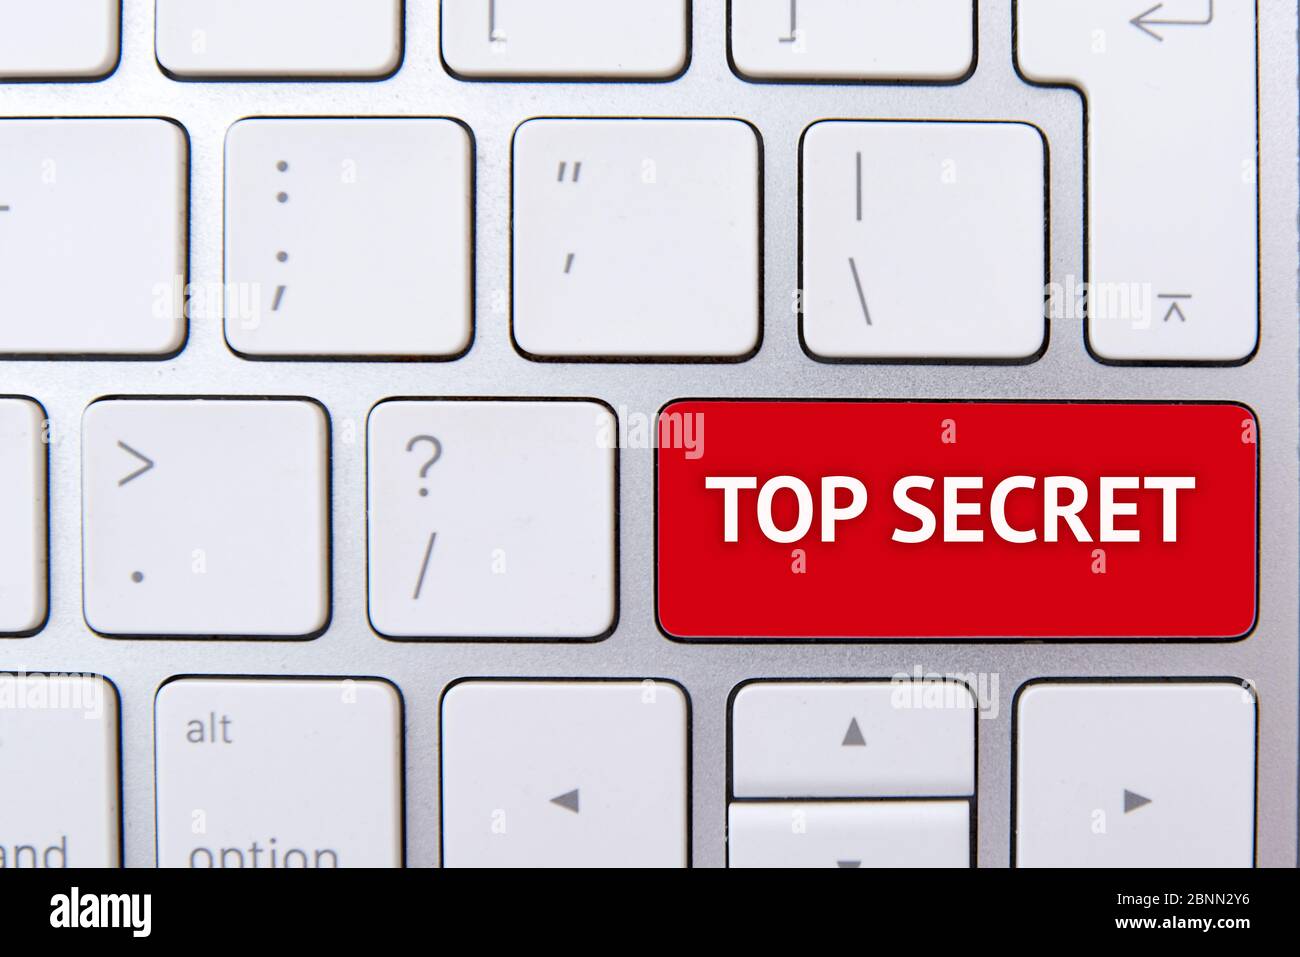 TOP SECRET text on red button of white keyboard, concept picture Stock Photo